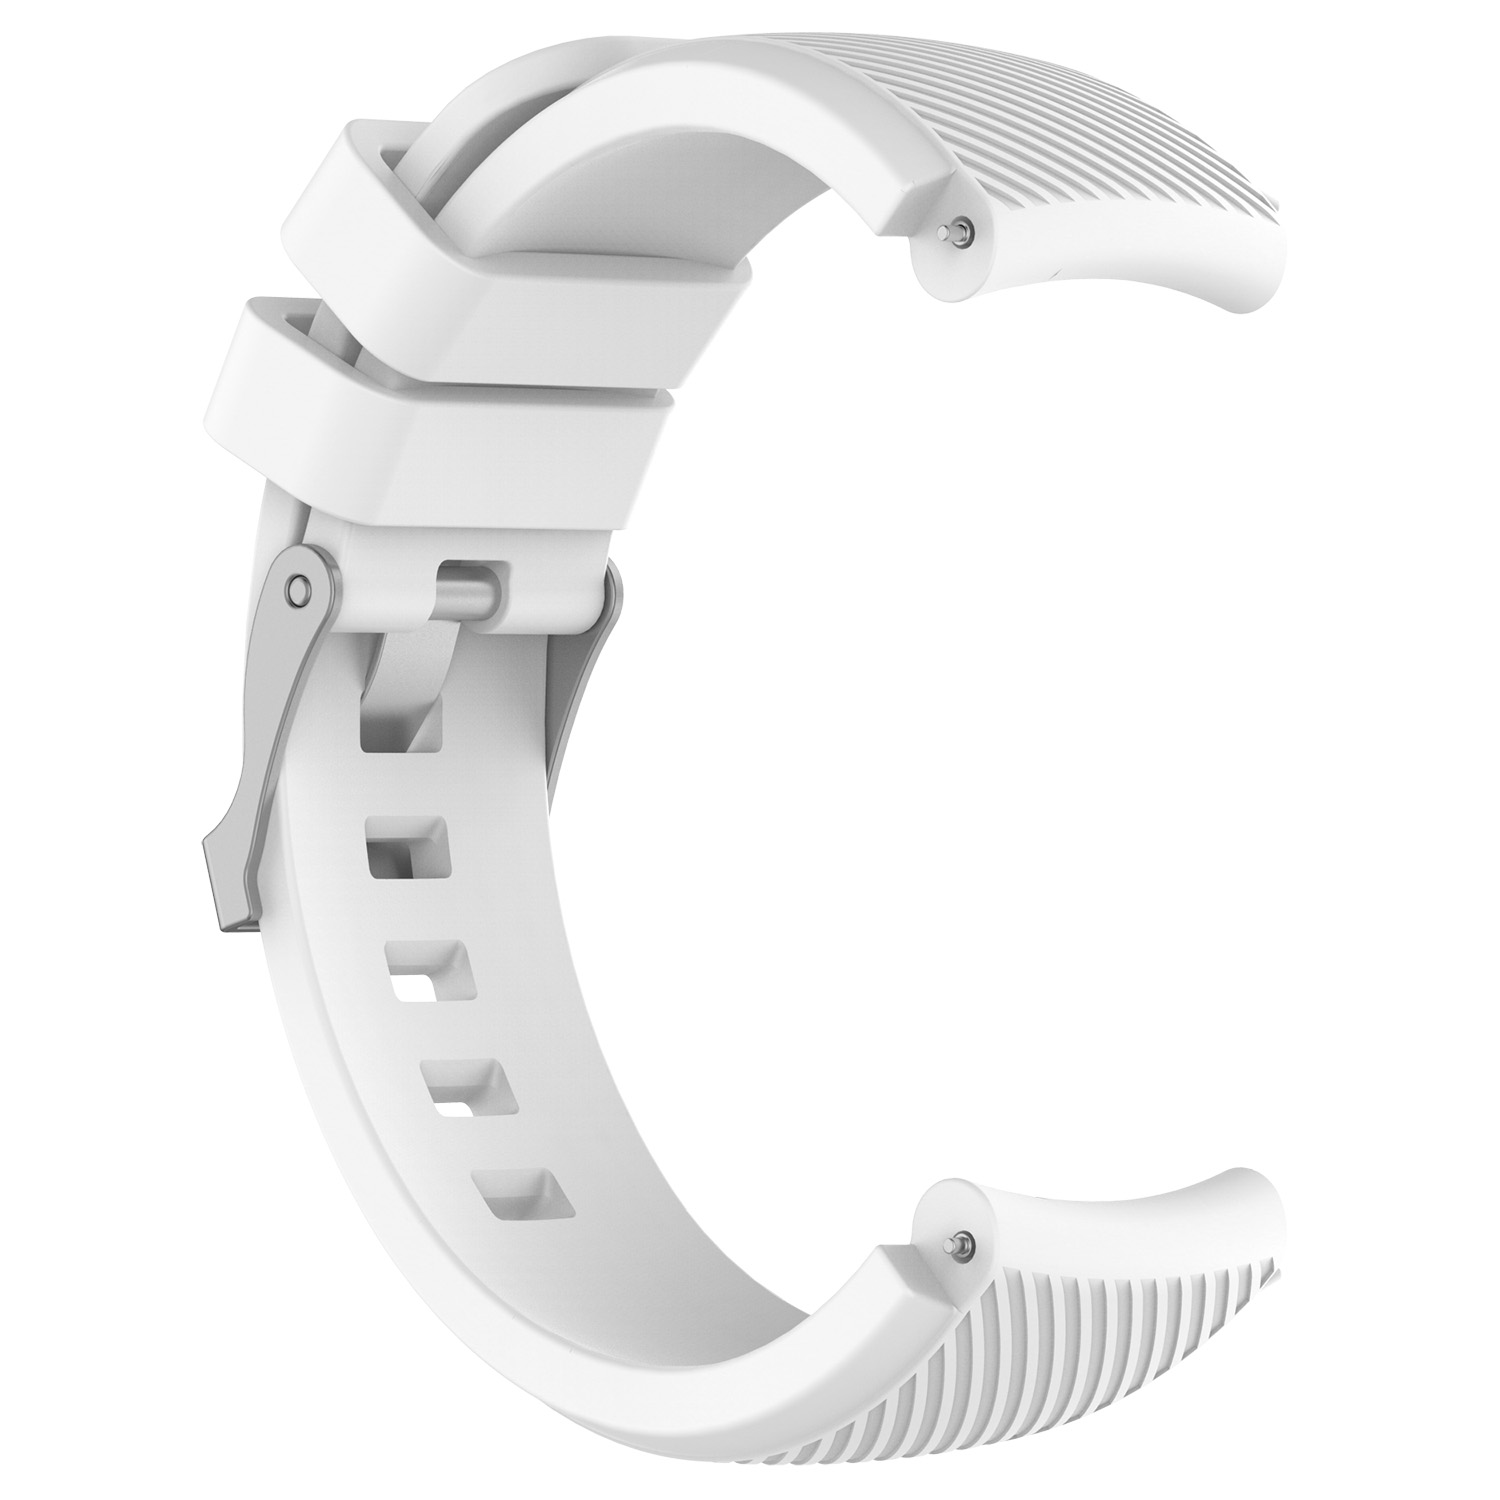 Bakeey-22mm-Universal-Watch-Band-Silicone-Watch-Strap-Replacement-for-HUAWEI-Watch-GT-1730954-14